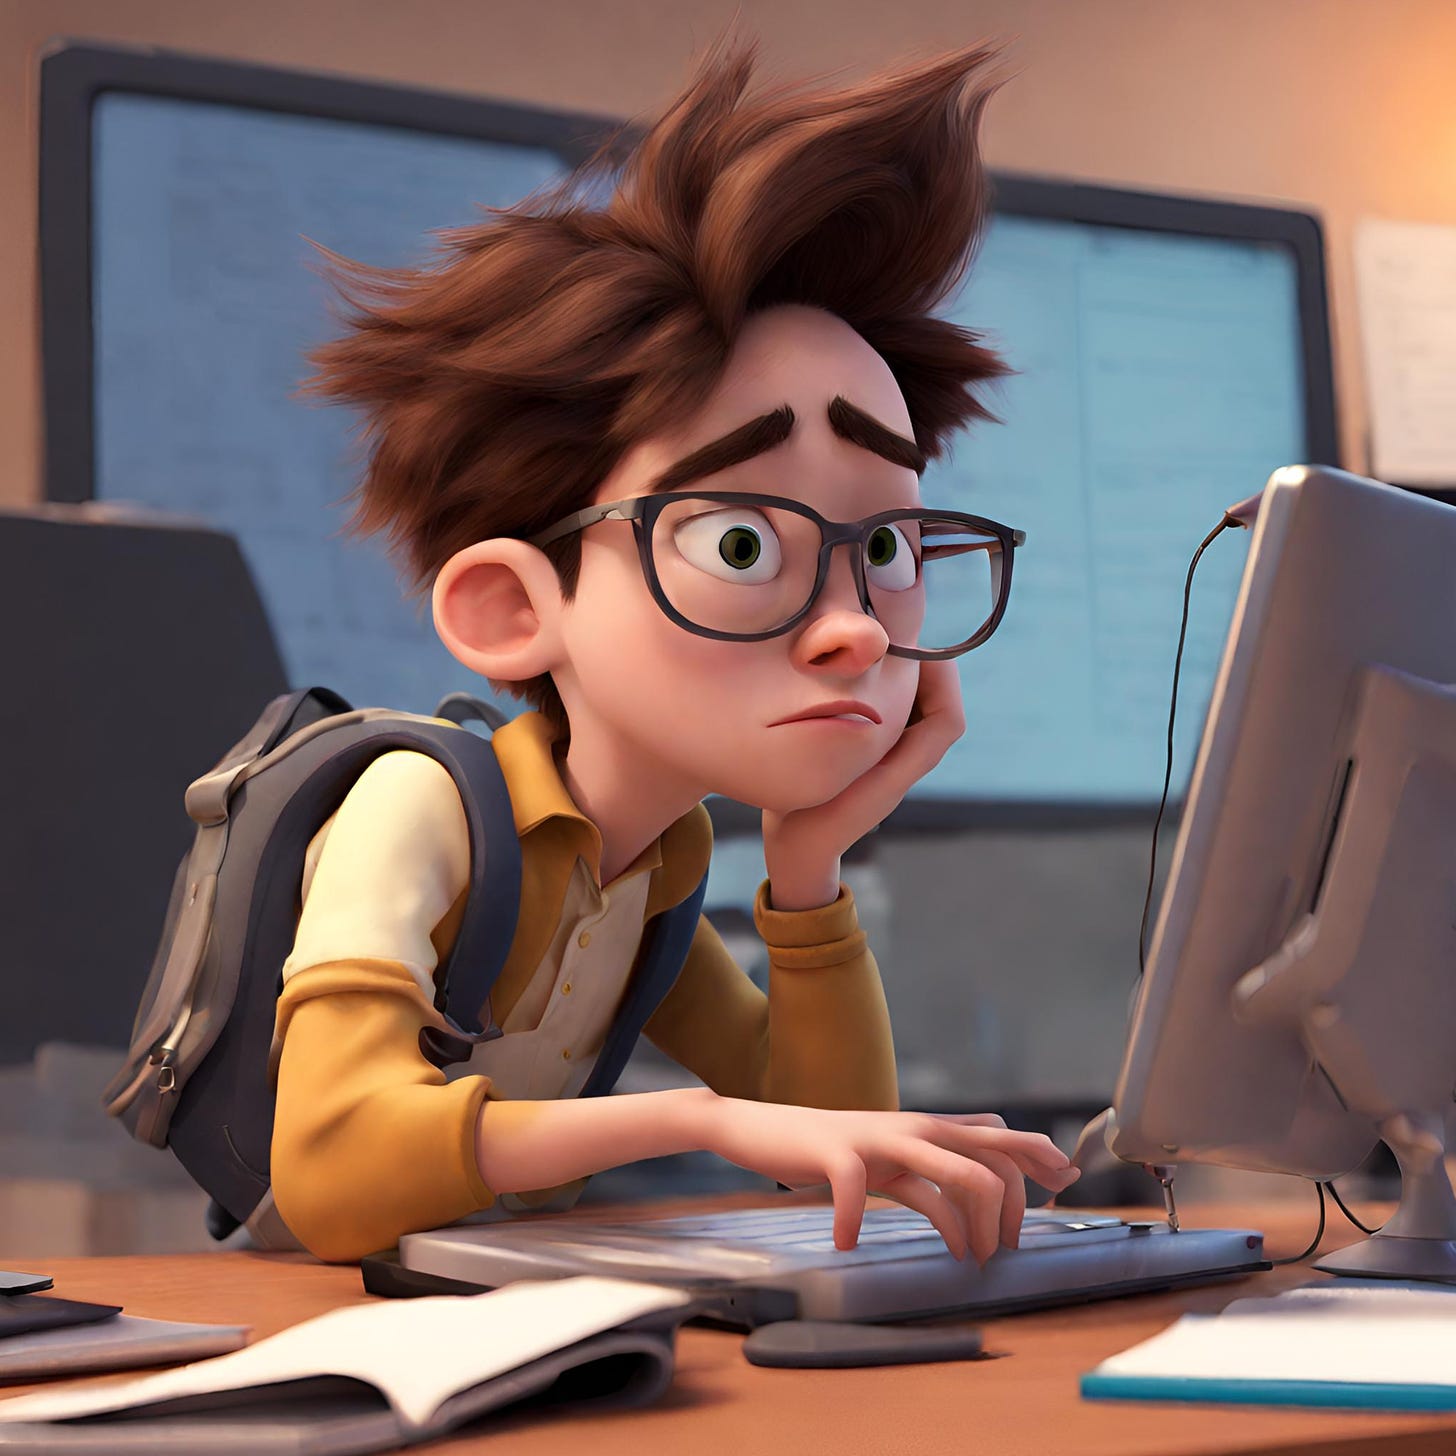 pixar style image of a young androgynous student having trouble reading on a computer